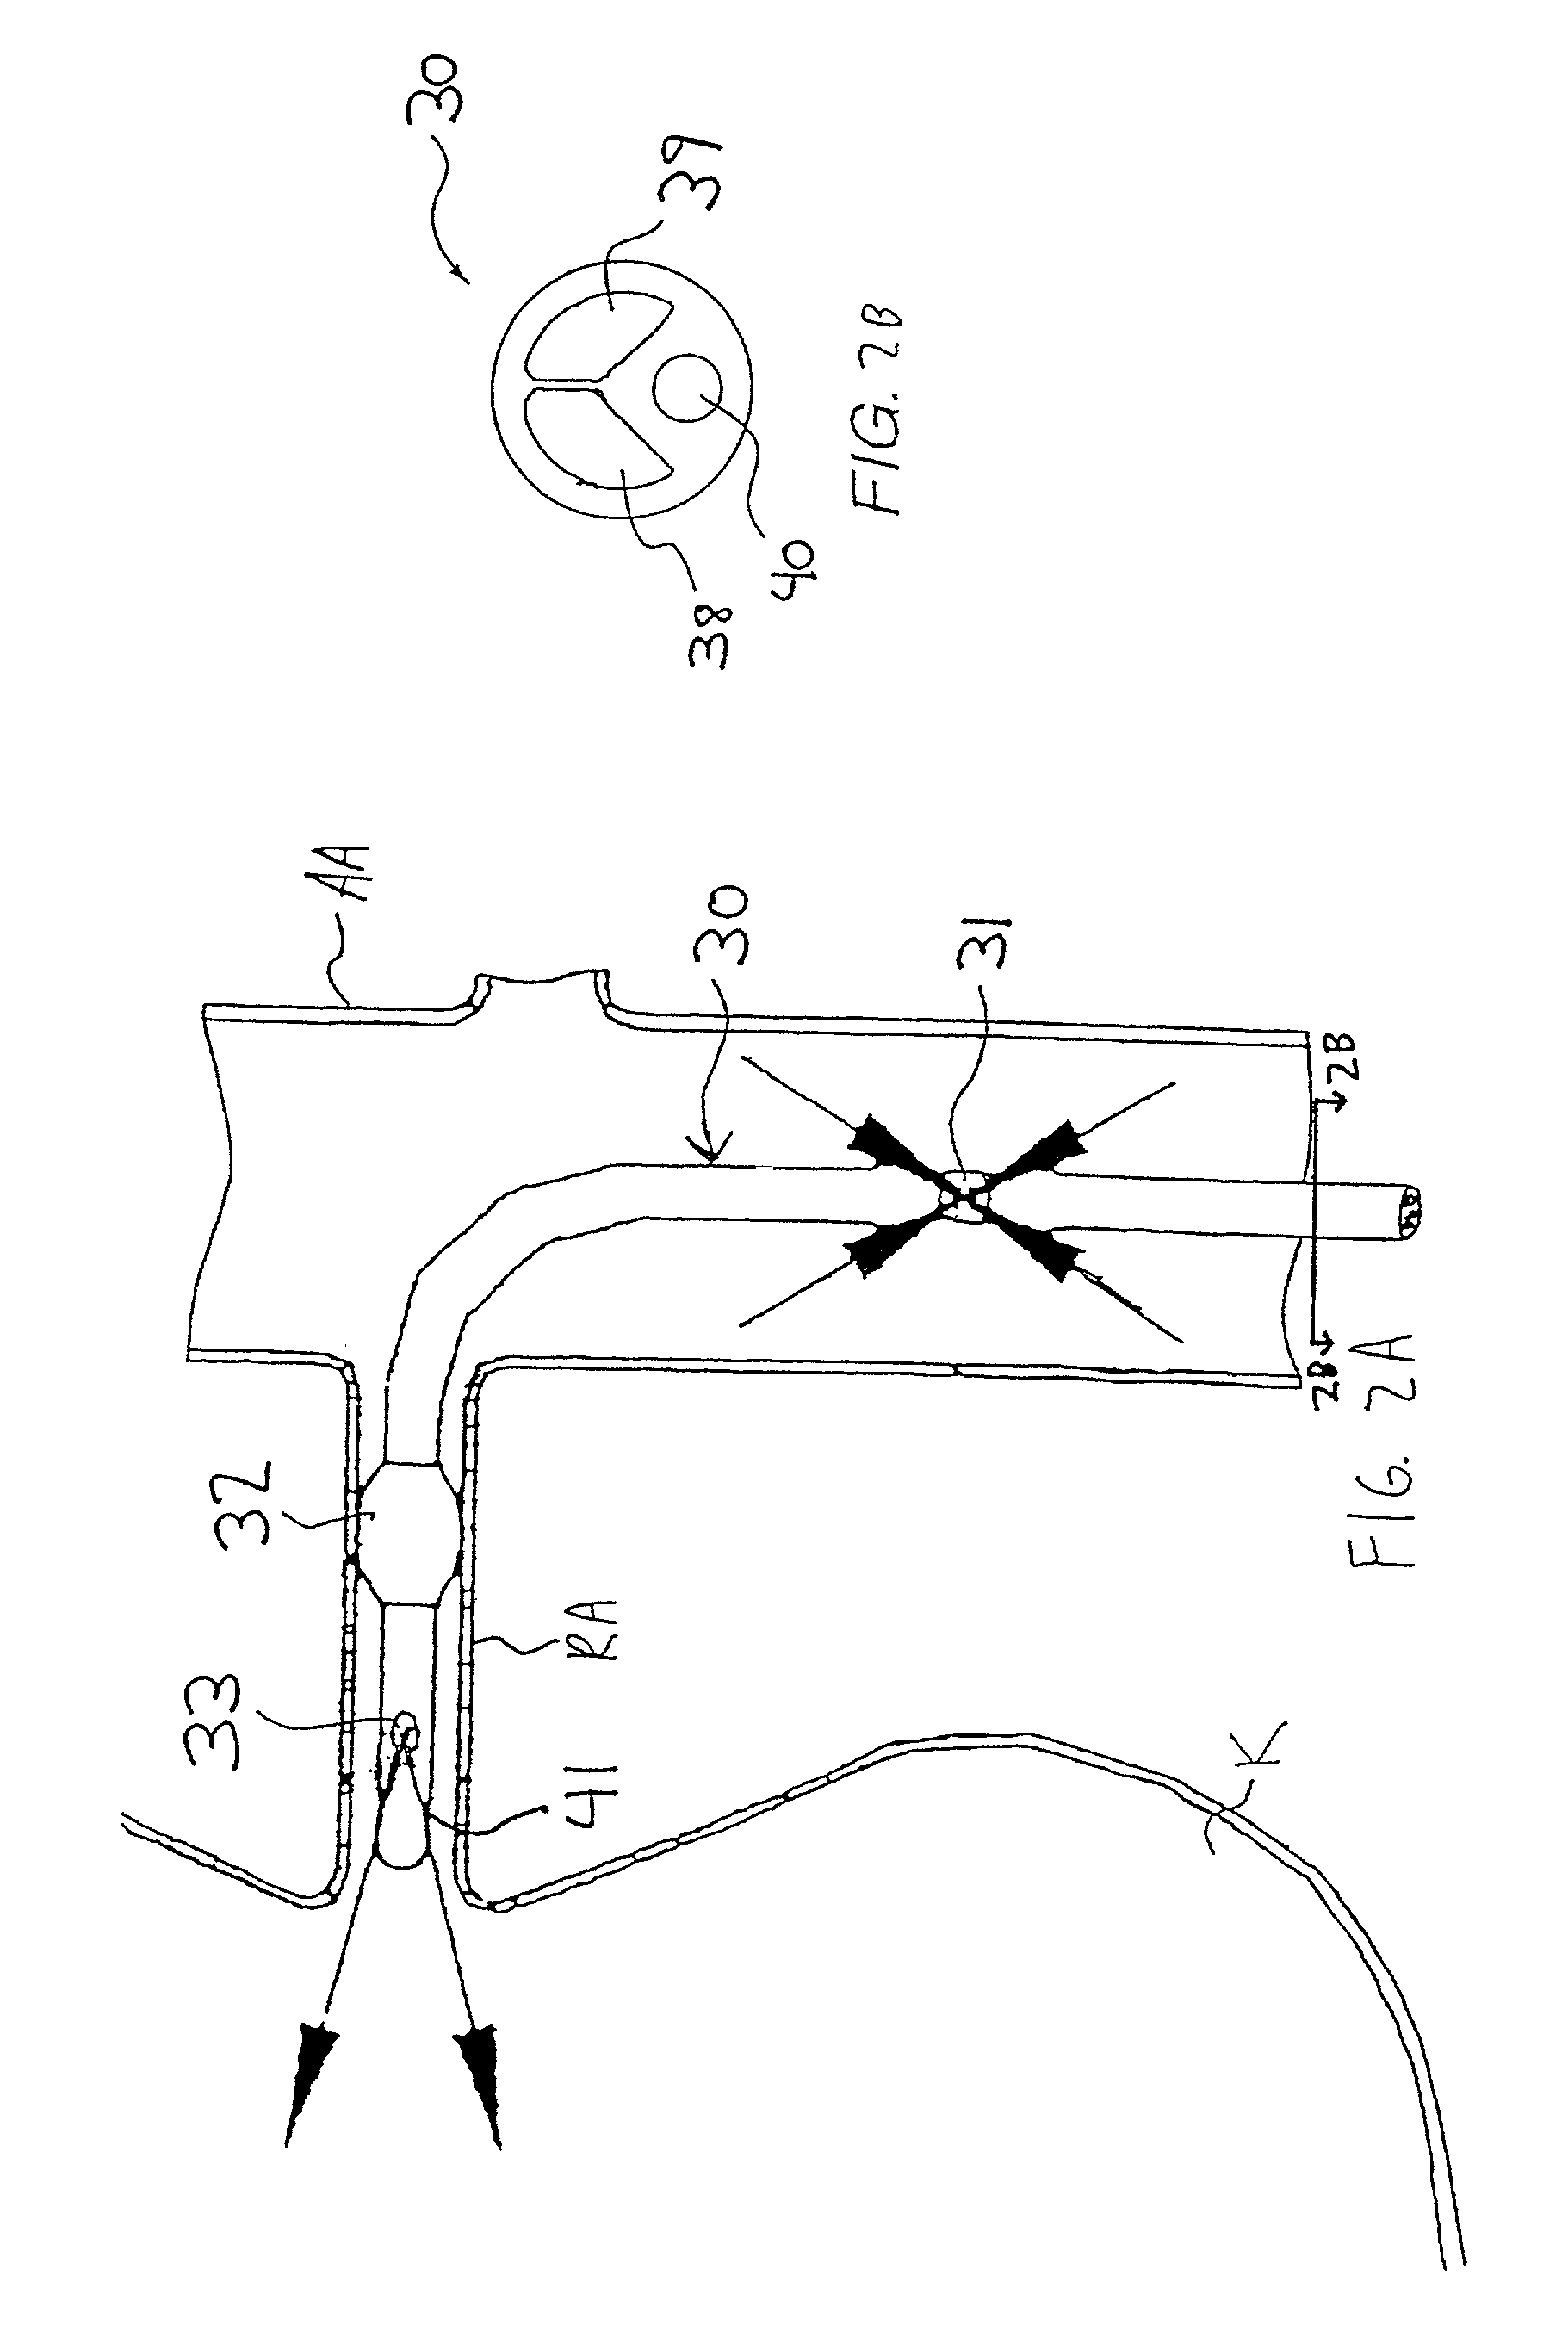 Apparatus and methods for treating congestive heart disease